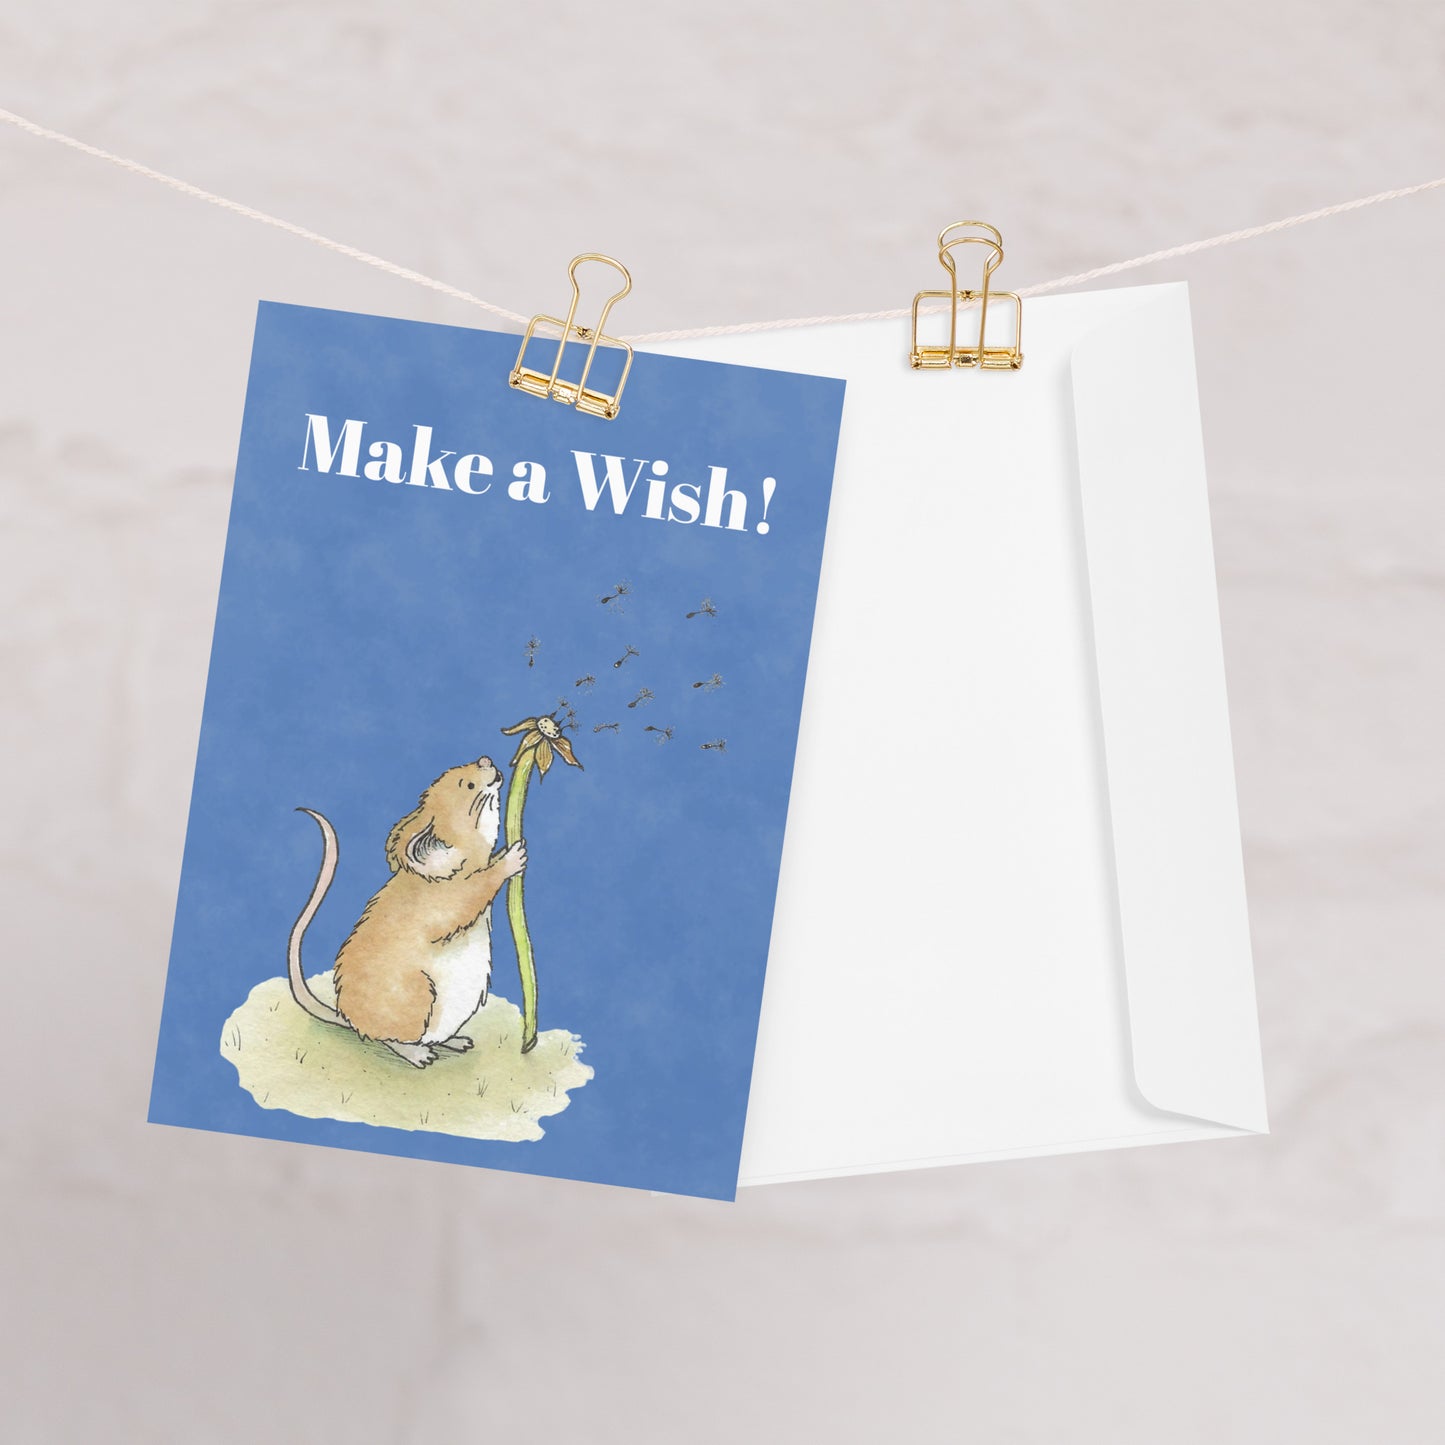 Ten fun greeting cards with ten envelopes. The front features white "Make a wish!" text and our watercolor dandelion wish mouse on a blue background. Inside is blank. Made with thick 350 gsm 150lb coated paperboard with vibrant printing.  Cards measure 5 by 7 inches. One card shown on clothesline with white envelope.